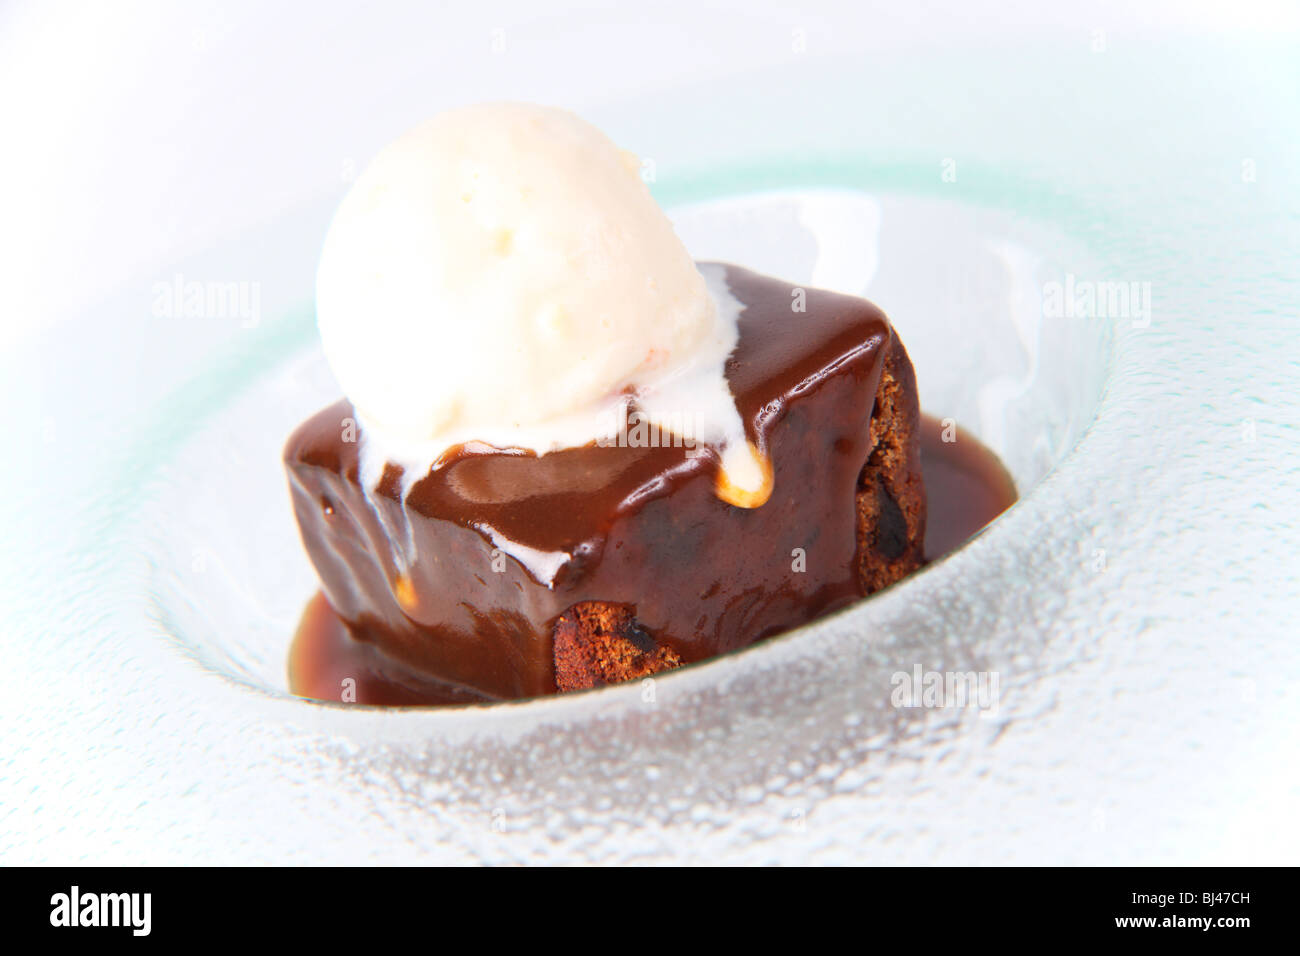 Sticky Toffee Pudding with Chocolate Sauce and Ice Cream Stock Photo